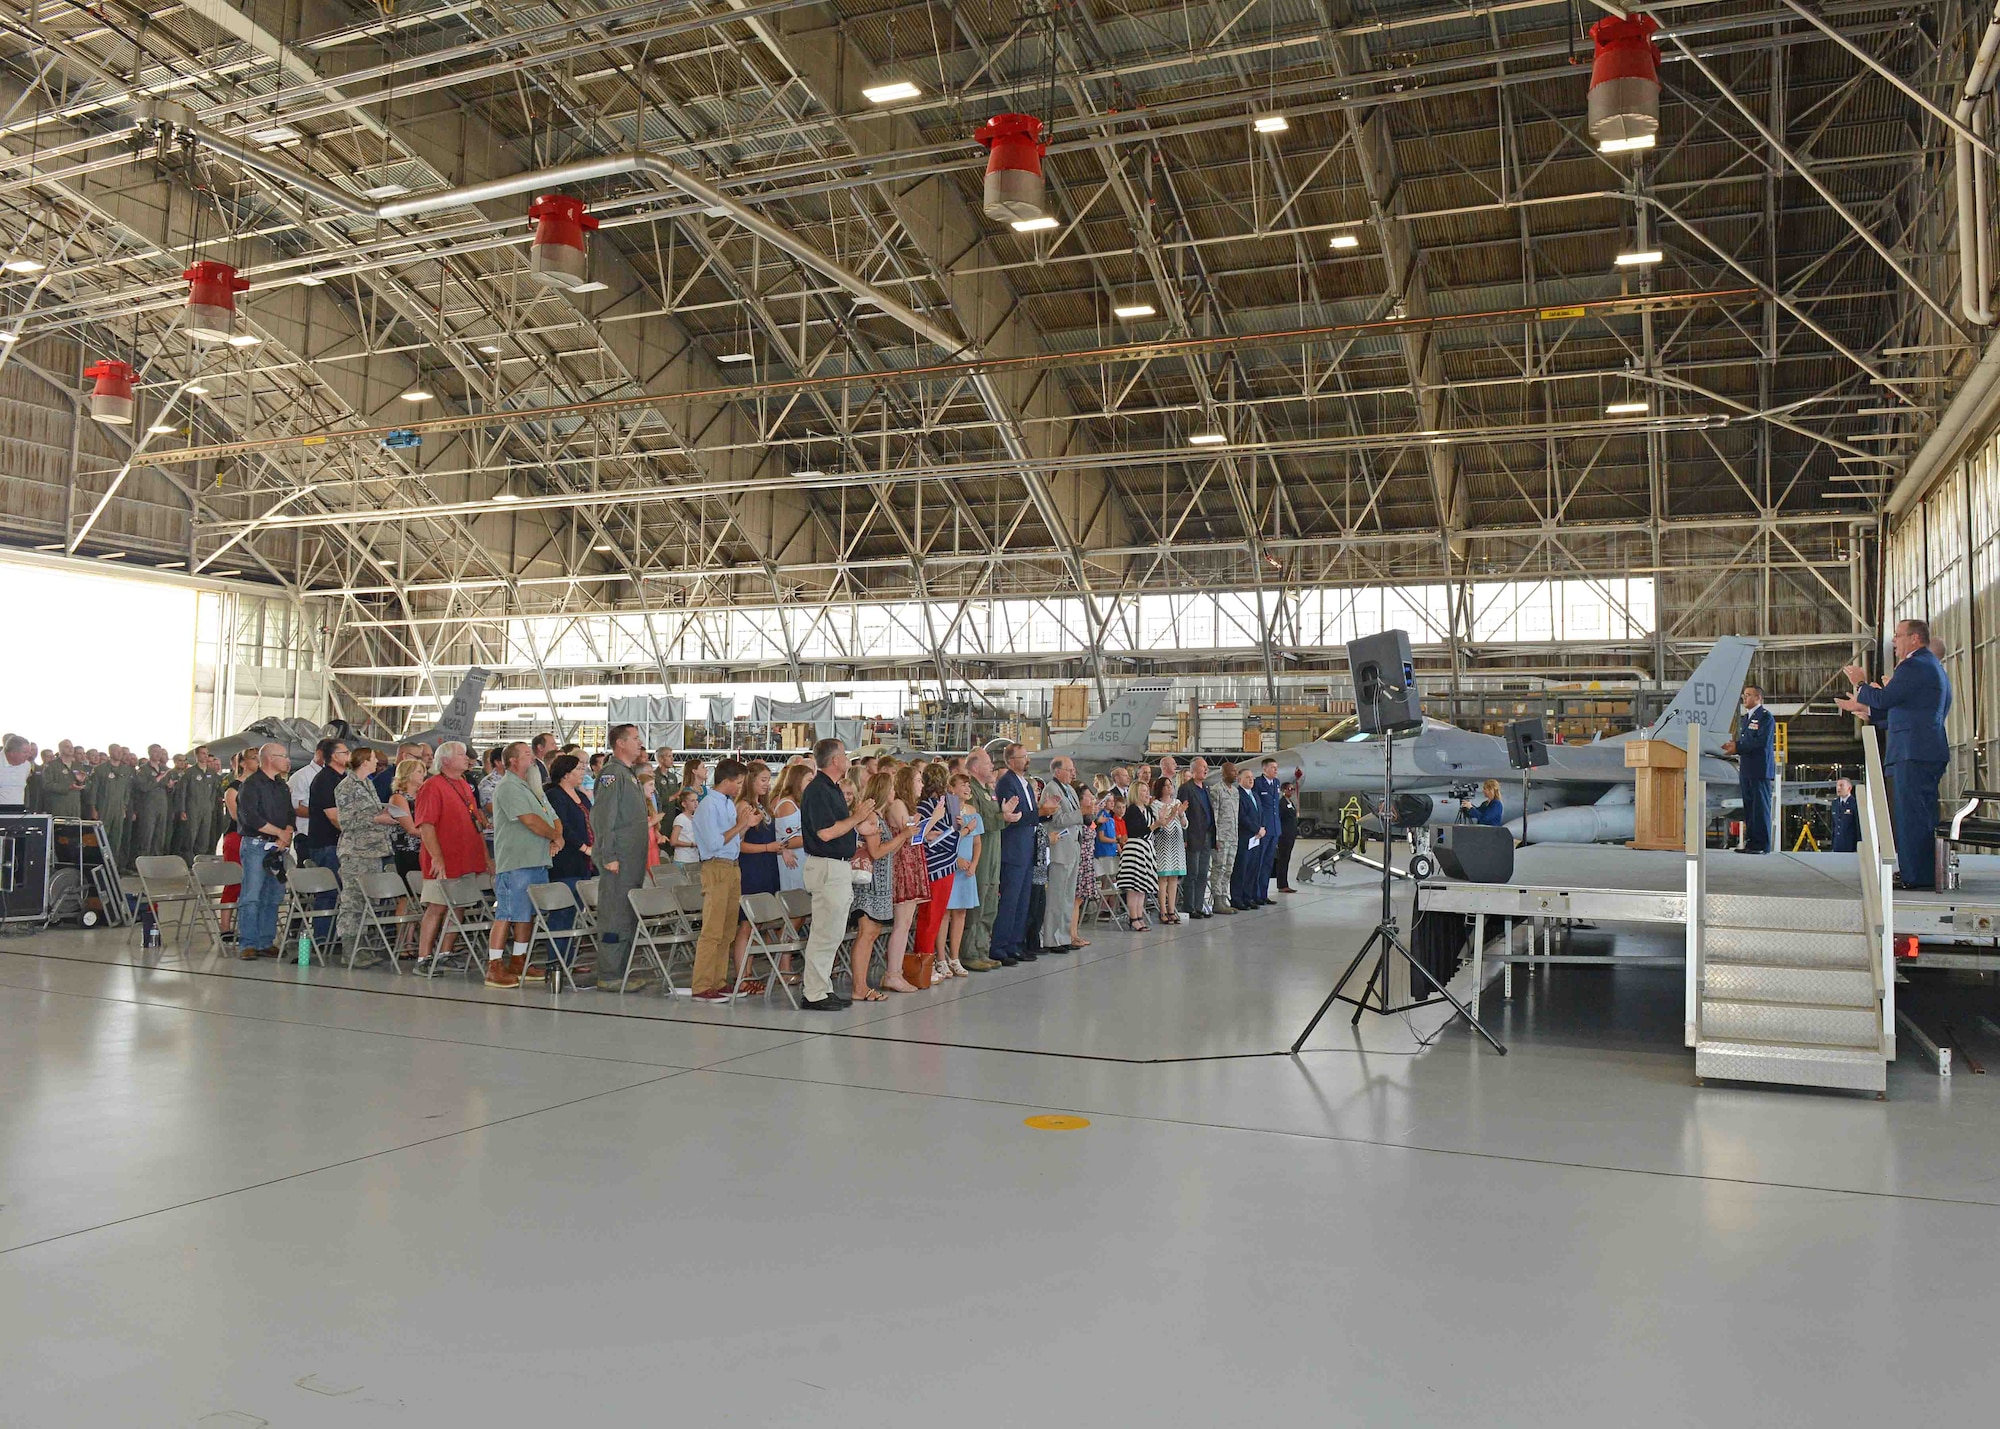 The change of command ceremony for the U.S. Air Force Test Pilot School was held in Hangar 1207 July 14. (U.S. Air Force photo by Kenji Thuloweit)